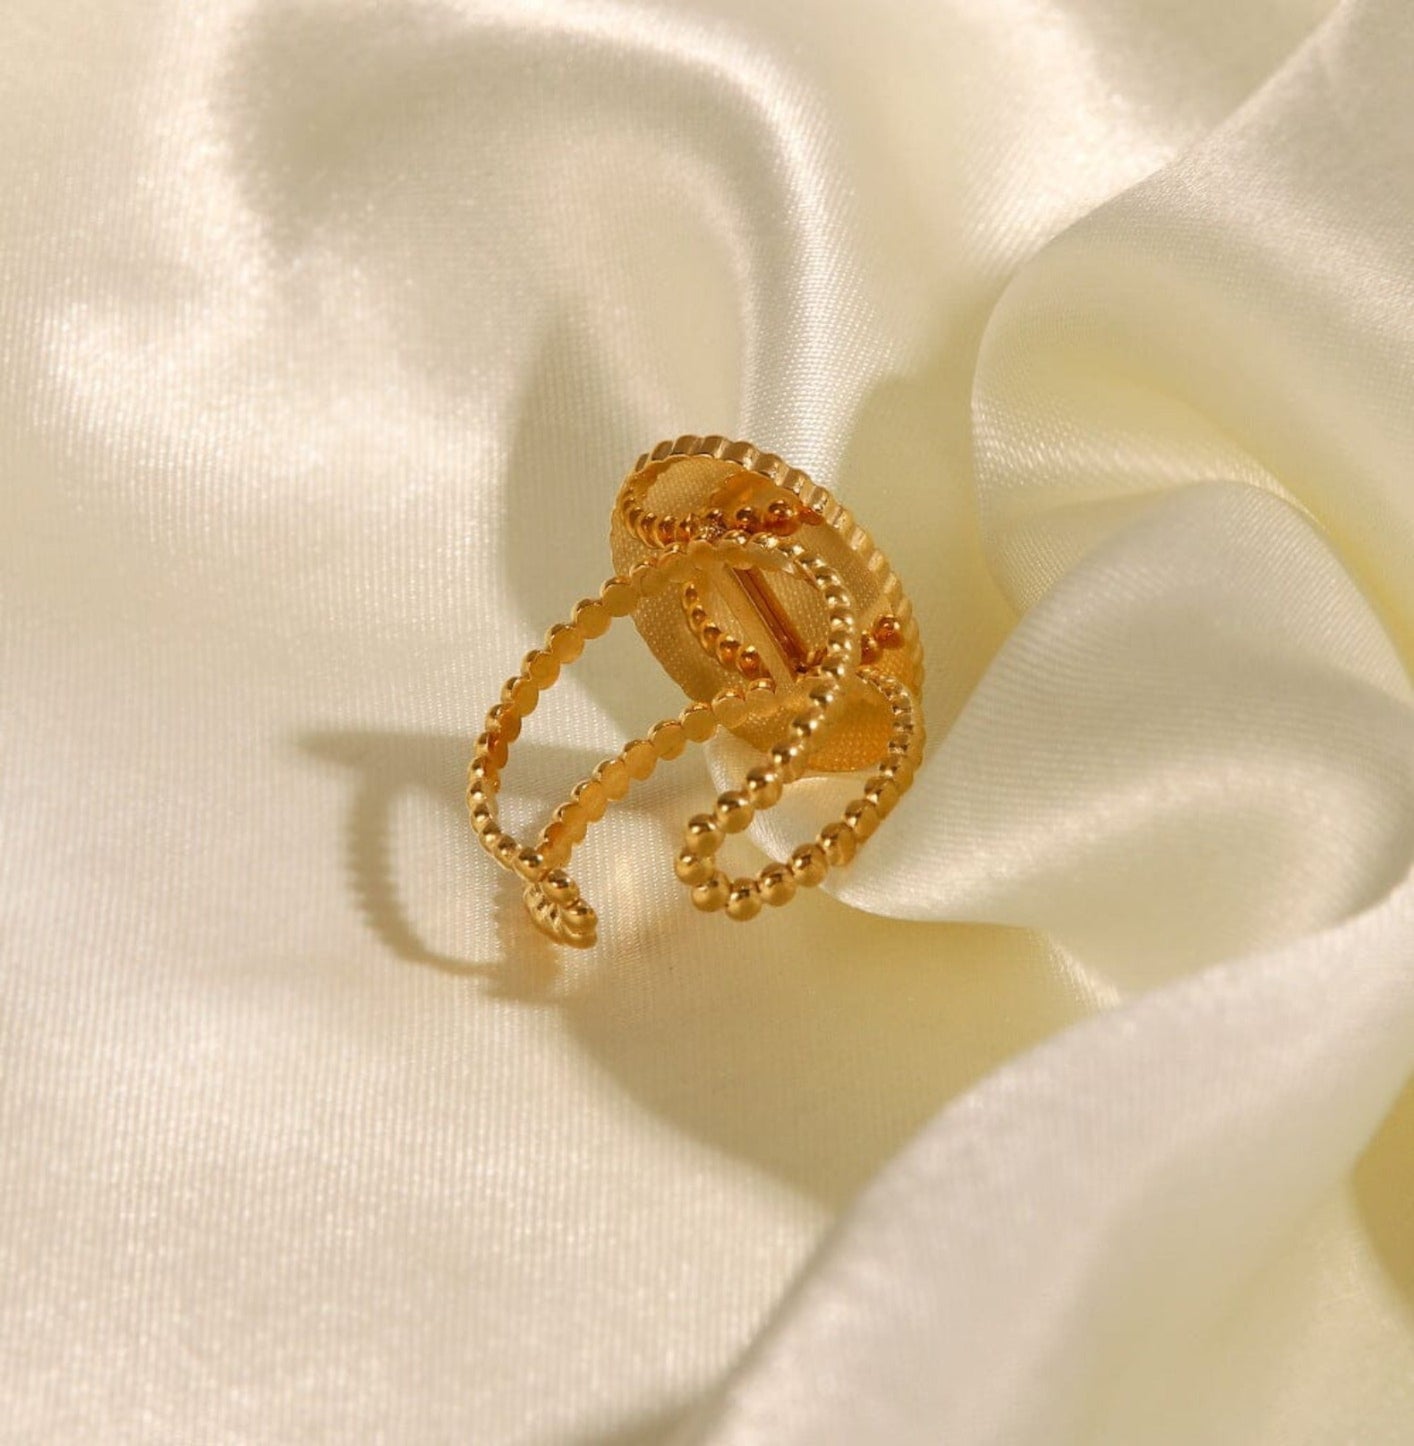 ENAMEL RING ring Yubama Jewelry Online Store - The Elegant Designs of Gold and Silver ! 